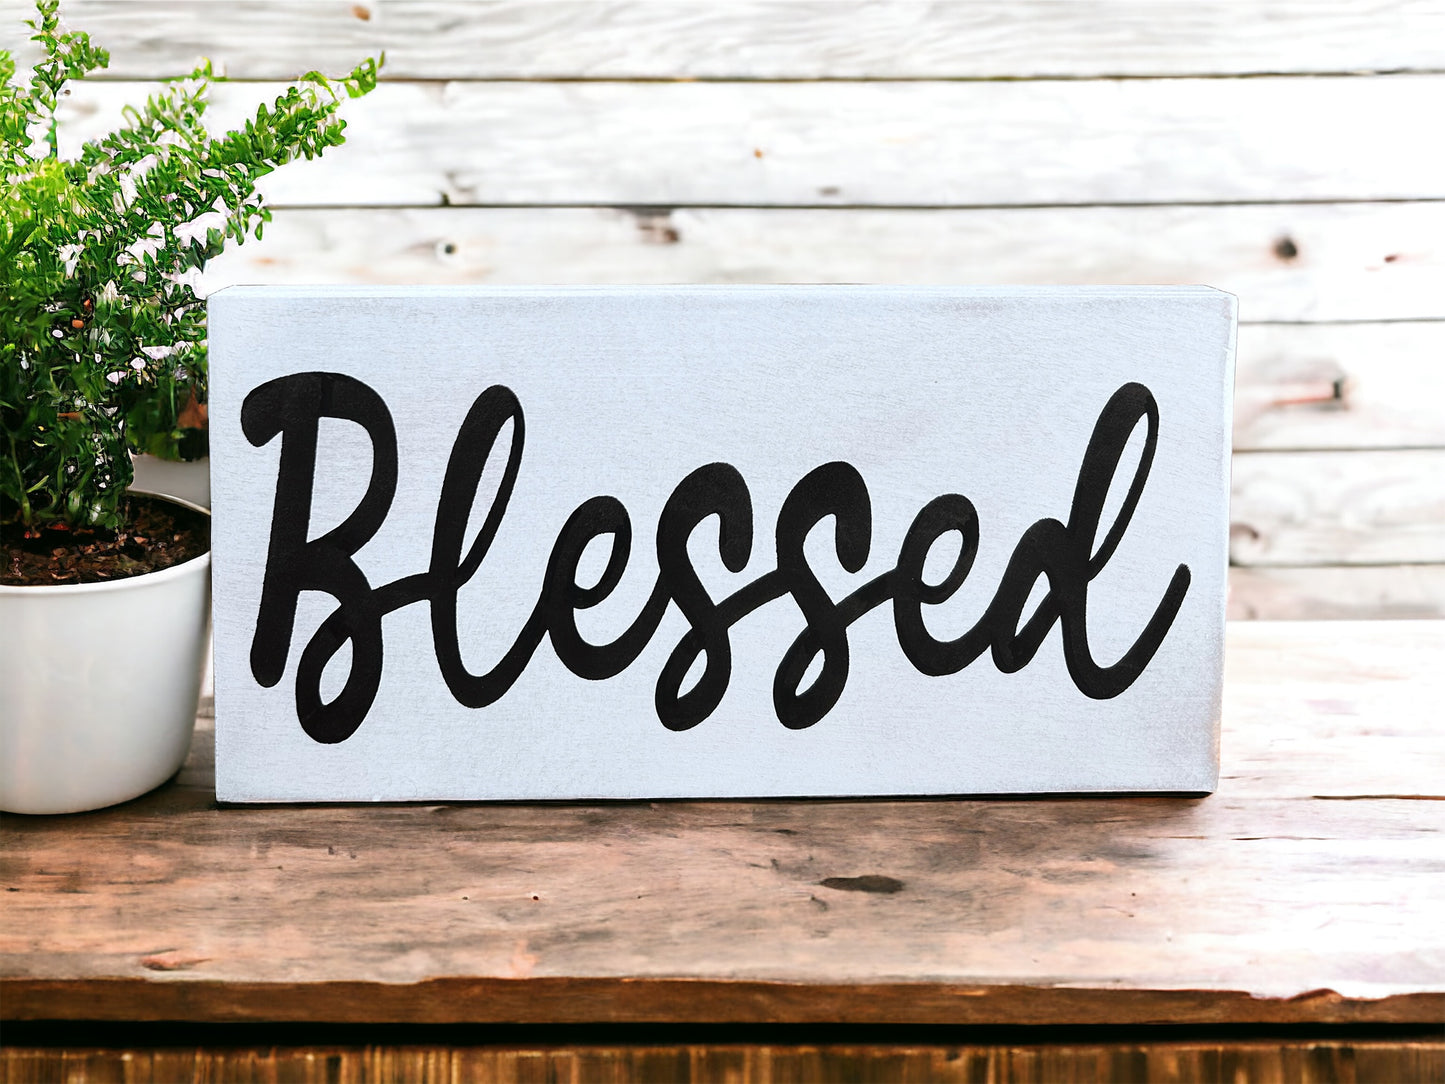 Blessed - Rustic Shelf Sitter